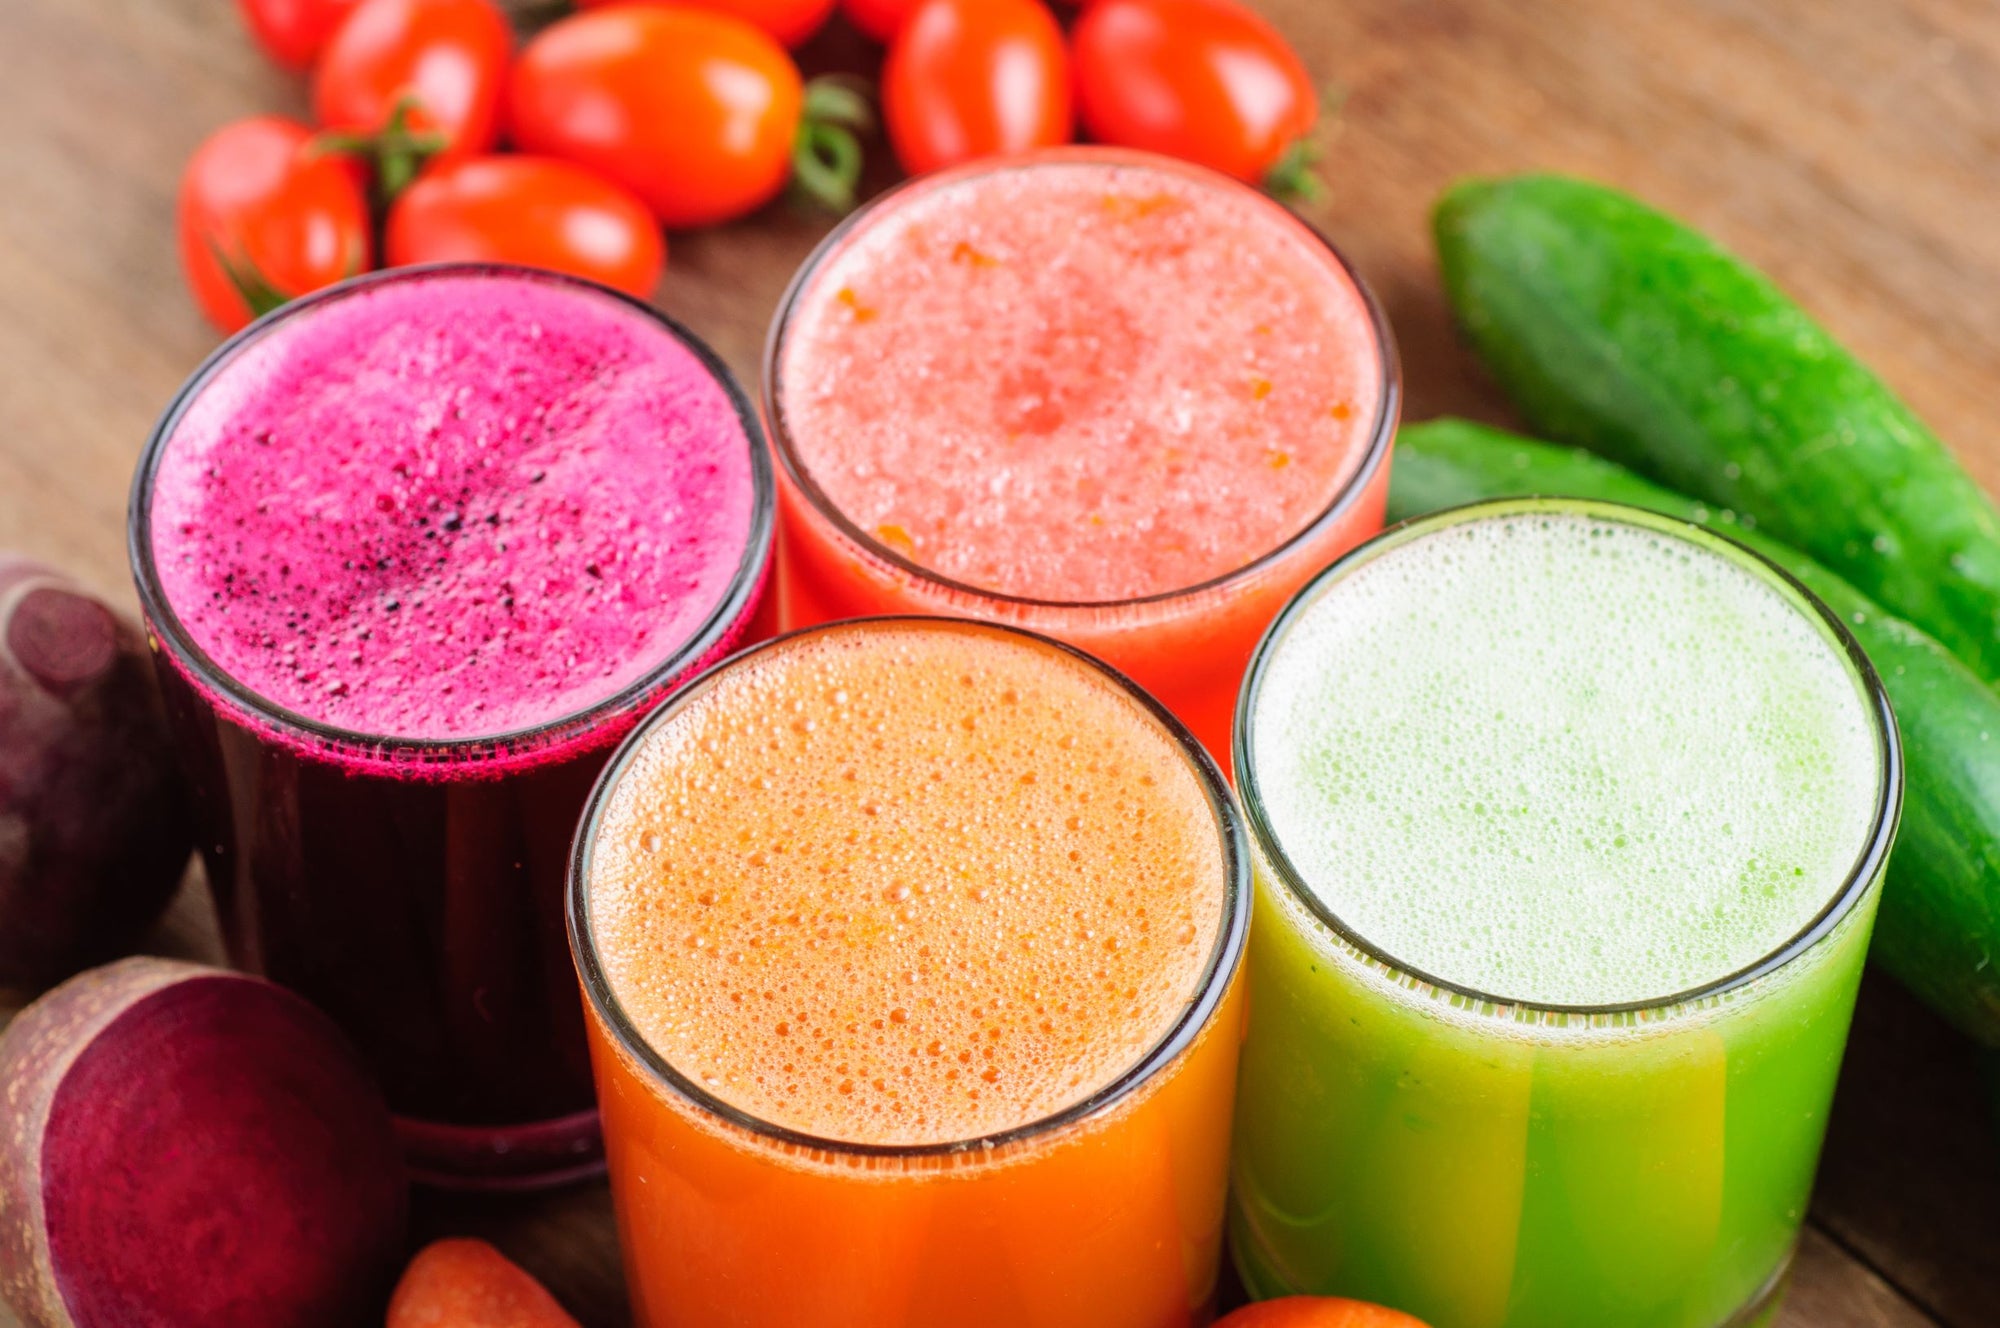 10 Juices & Drinks That Will Boost Your Immune System